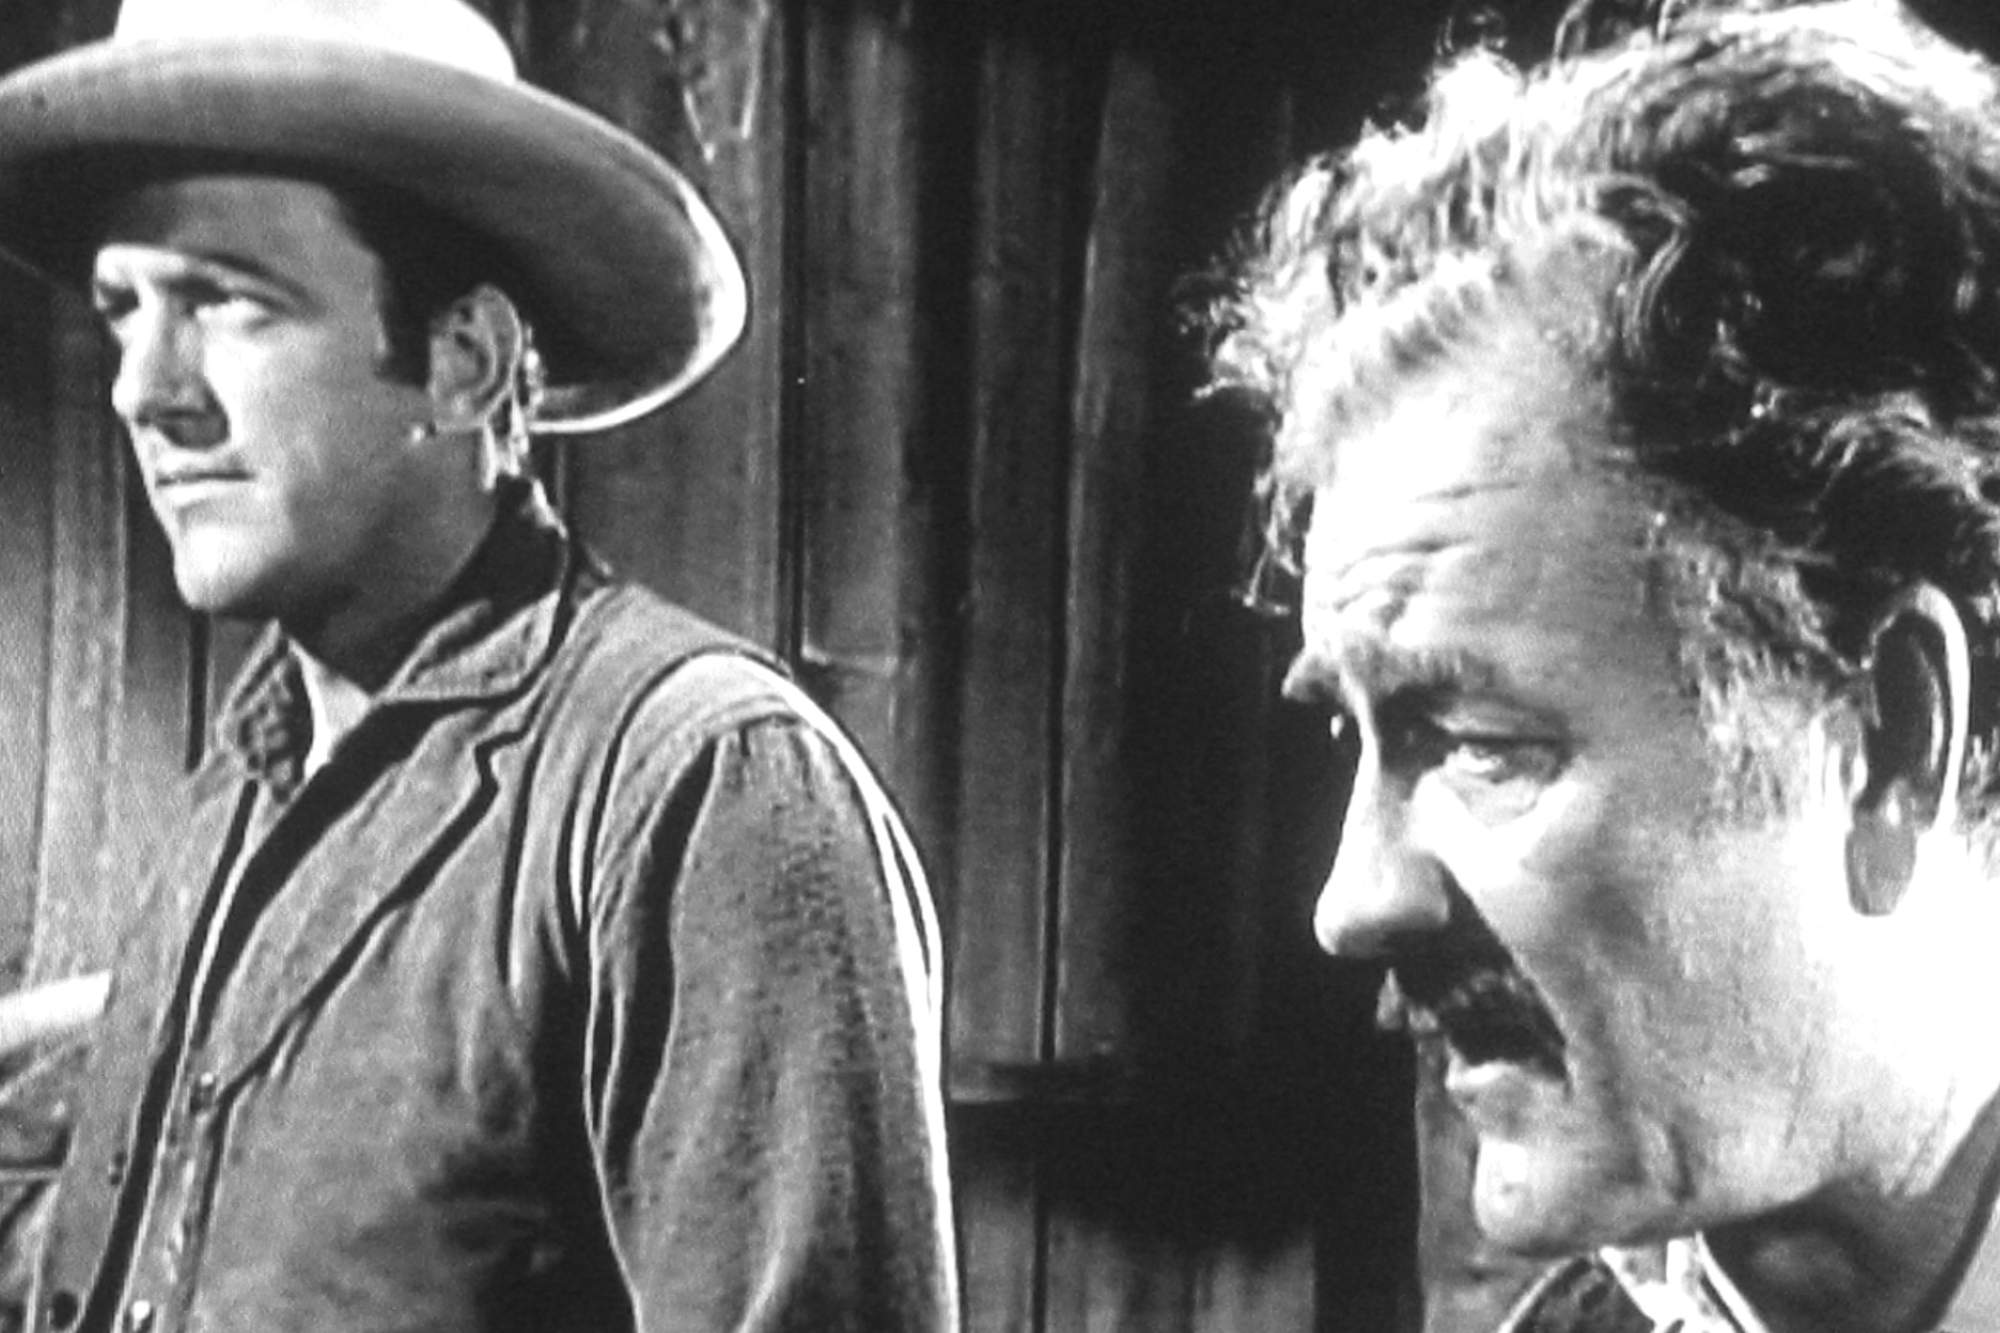 'Gunsmoke' James Arness as Matt Dillon and Milburn Stone as Doc Adams standing next to each other with a serious look on their faces.